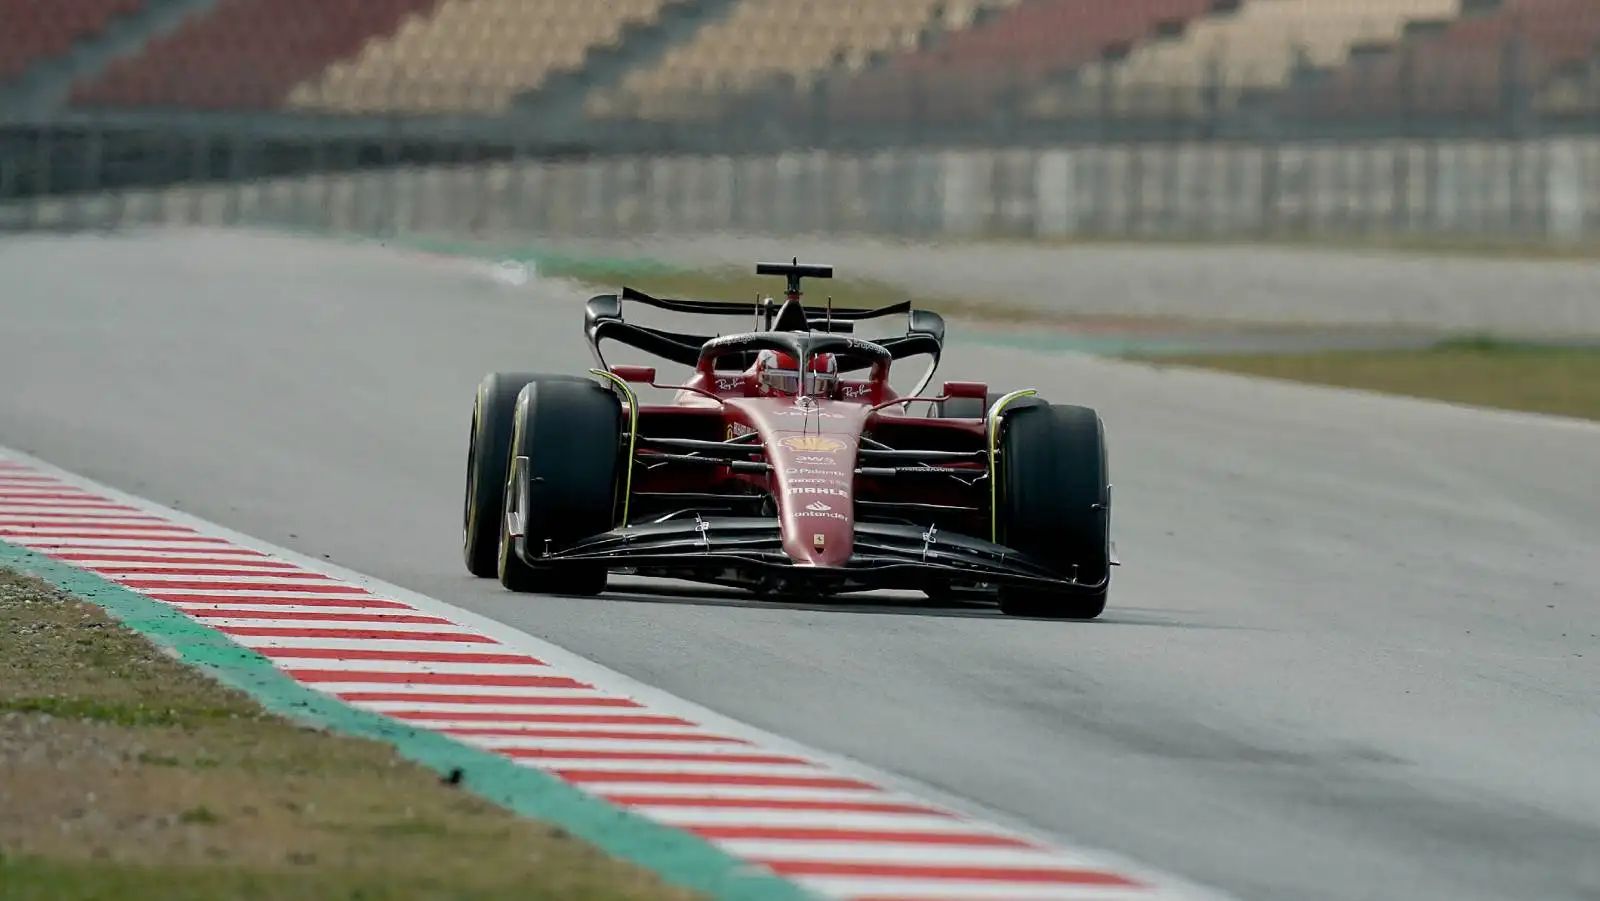 Charles Leclerc, Ferrari, with the DRS flap open. Barcelona February 2022.